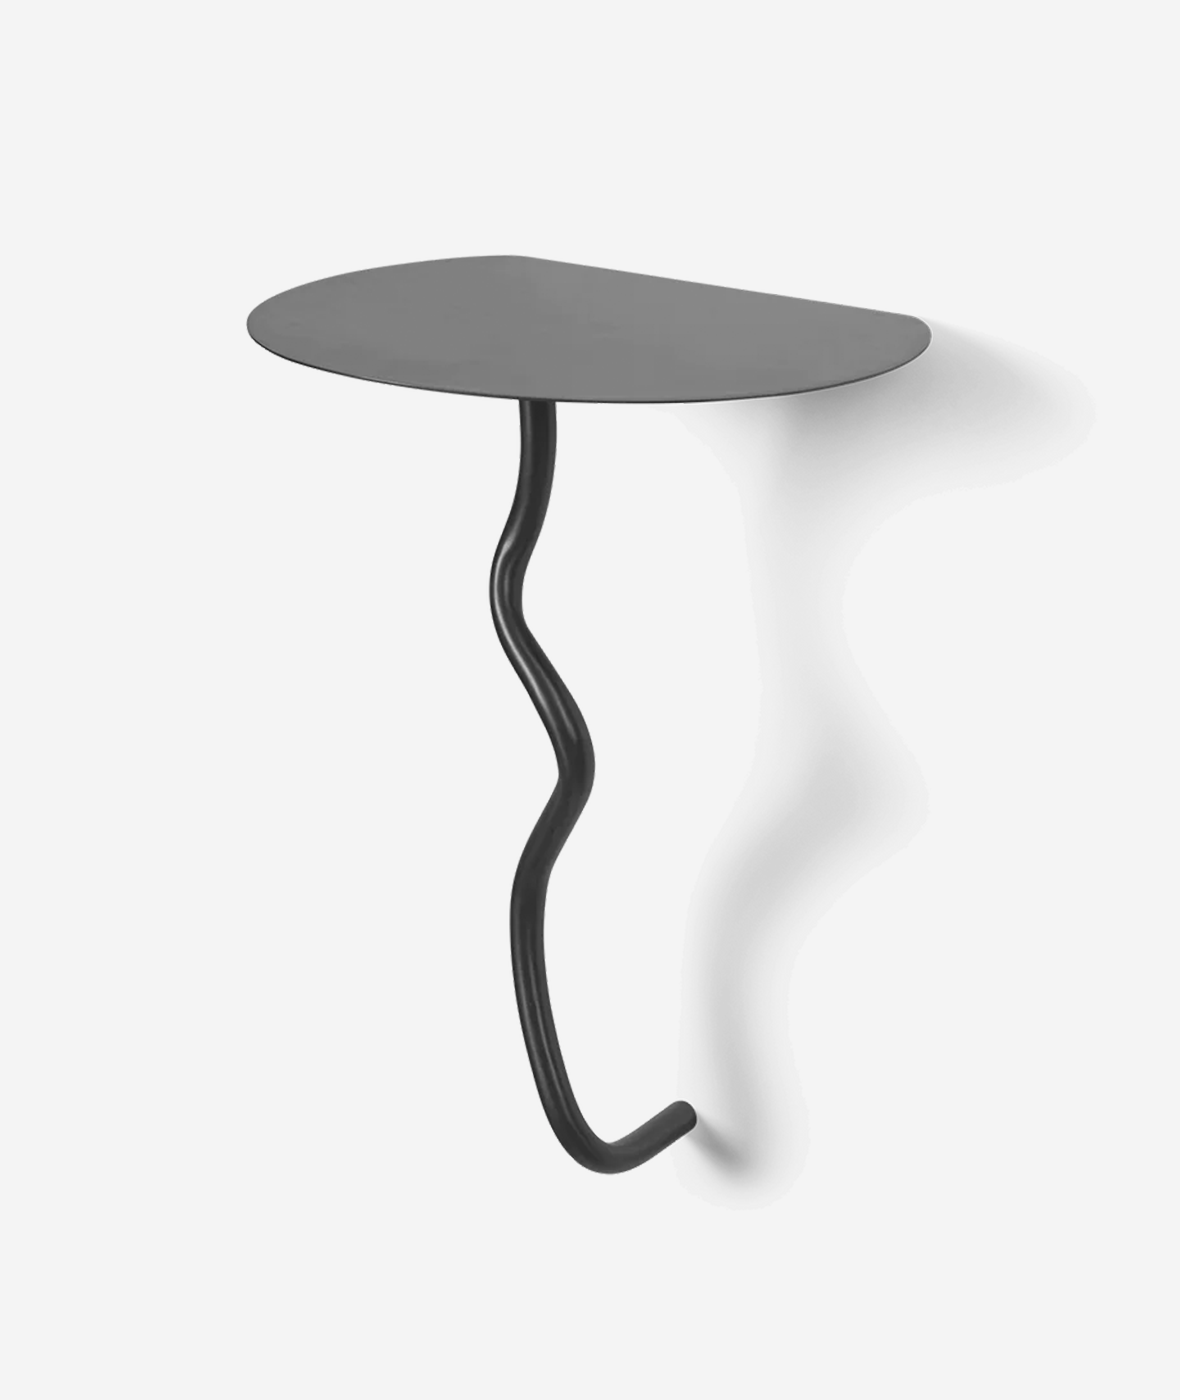 Curvature Wall Table - More Options